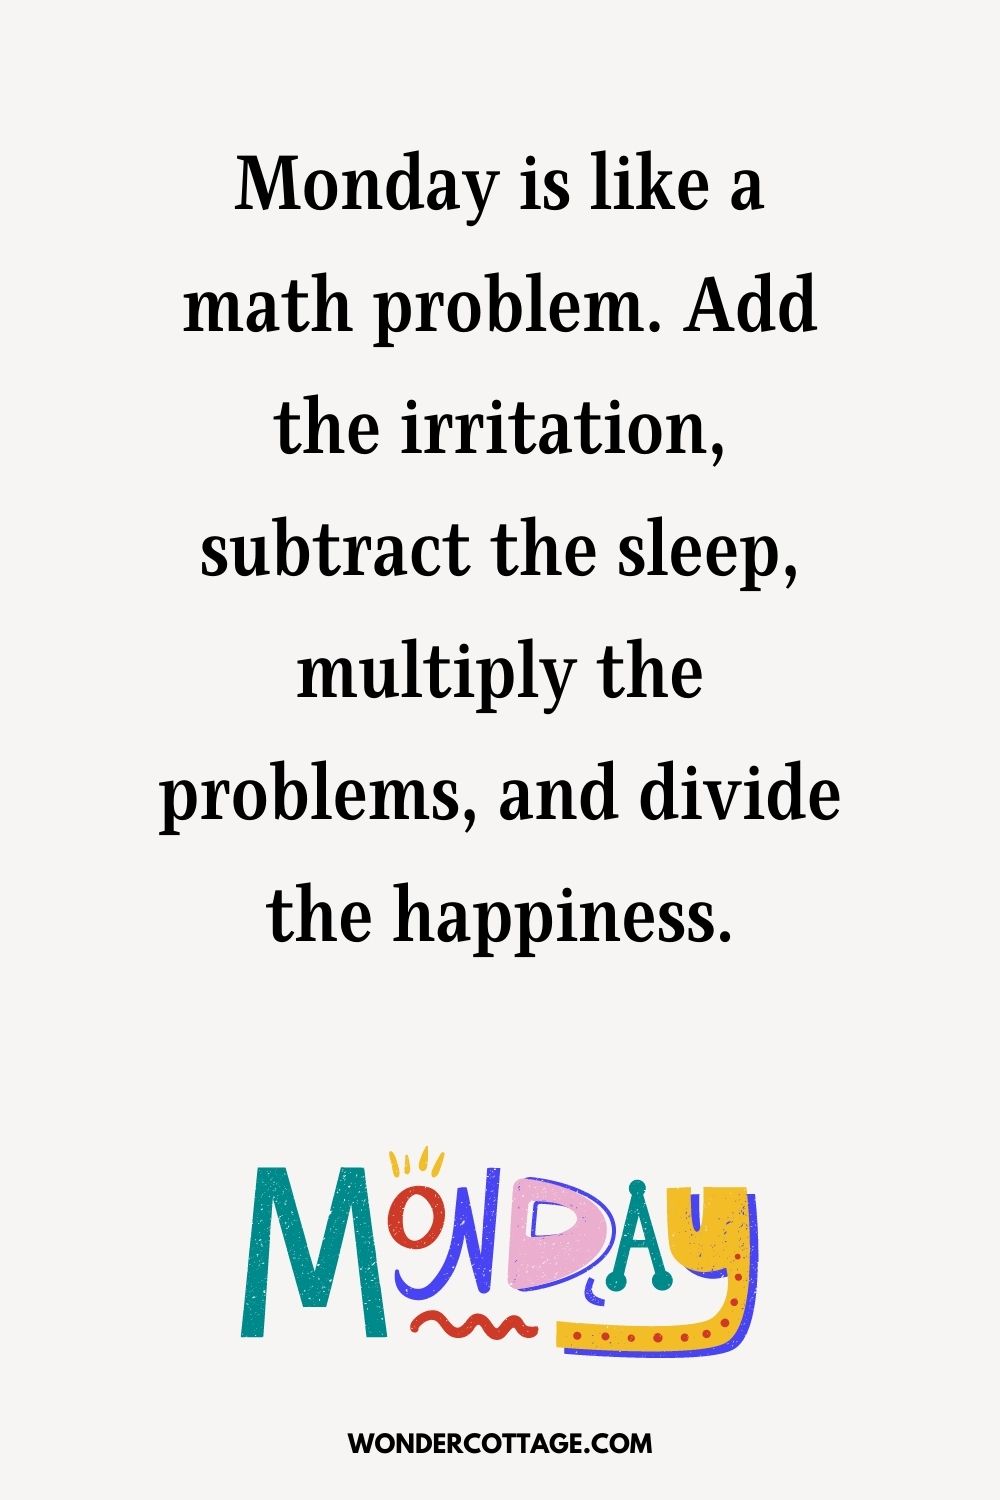 Monday is like a math problem. Add the irritation, subtract the sleep, multiply the problems, and divide the happiness.